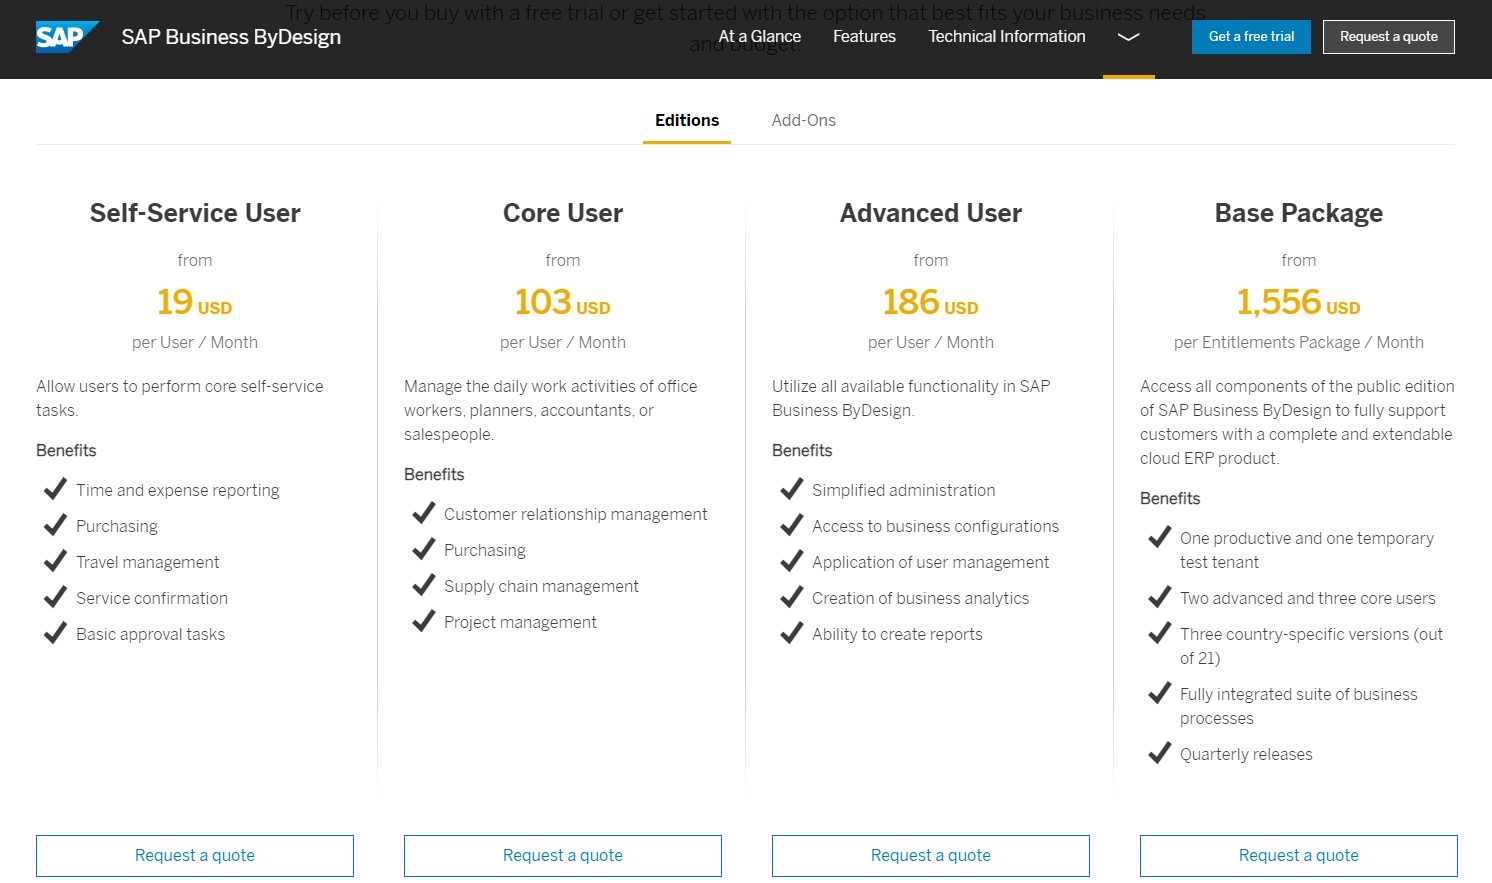 SAP offers both licensing and subscription plans, as well as a 30-day free trial.